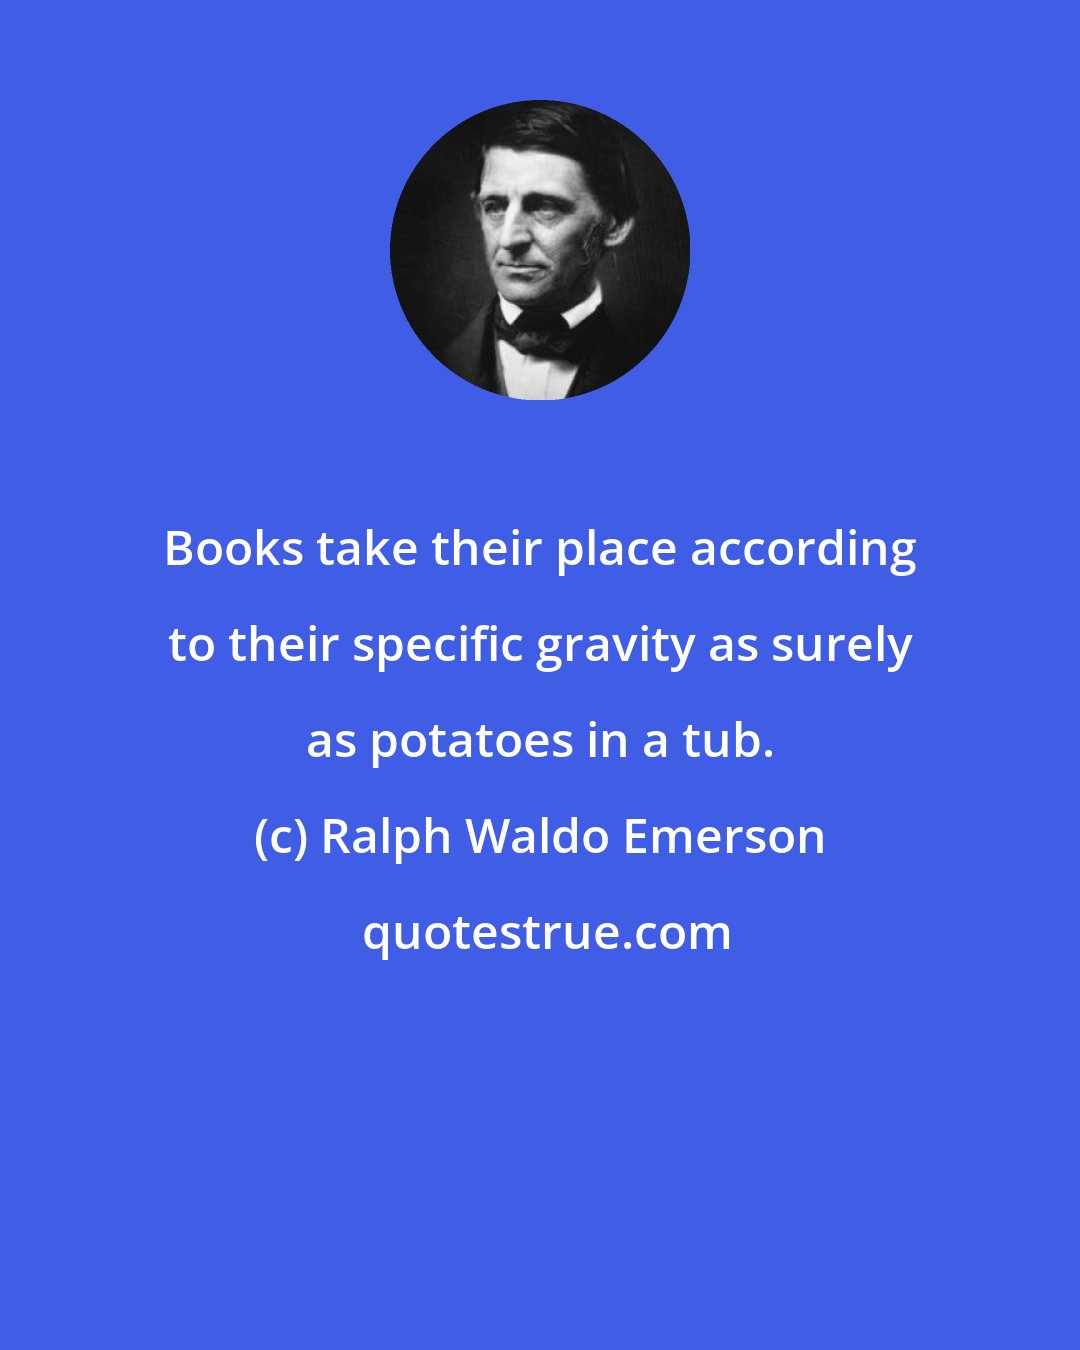 Ralph Waldo Emerson: Books take their place according to their specific gravity as surely as potatoes in a tub.